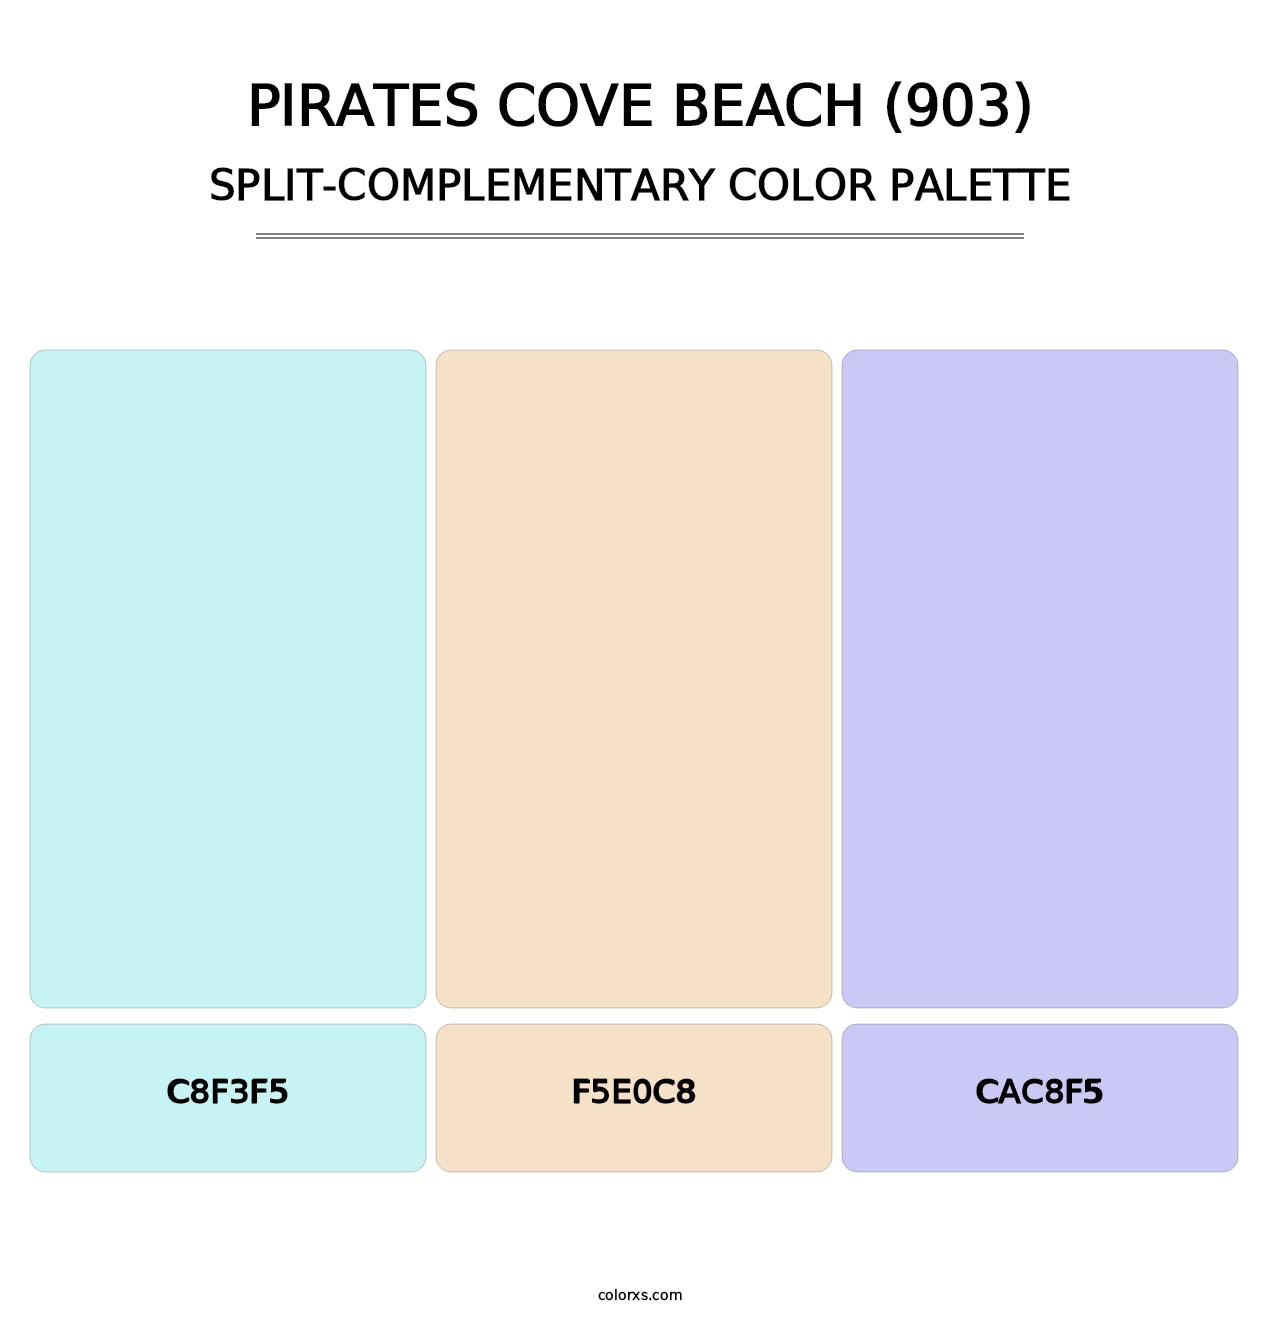 Pirates Cove Beach (903) - Split-Complementary Color Palette